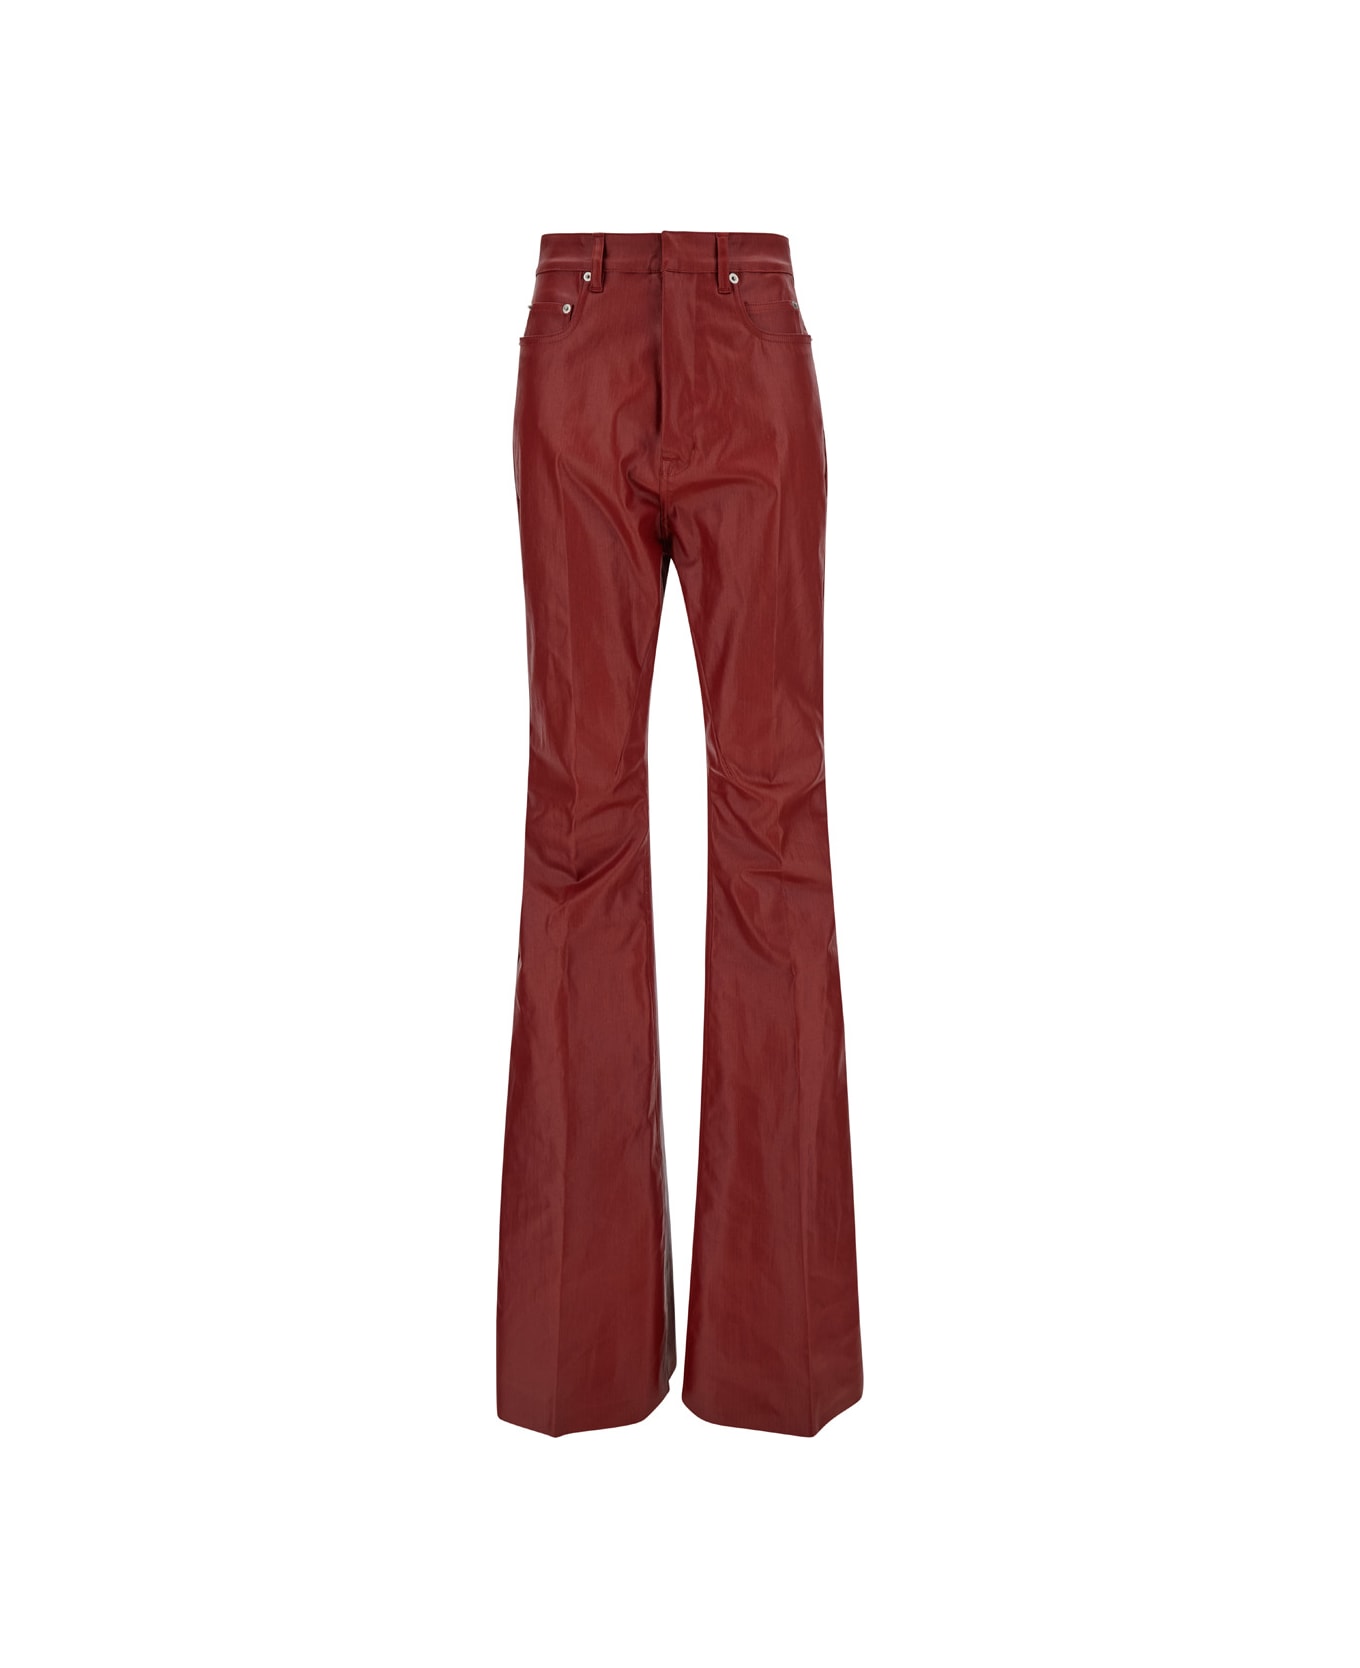 Rick Owens Red Flared High Waist Pants In Cotton Blend Woman - Red ボトムス